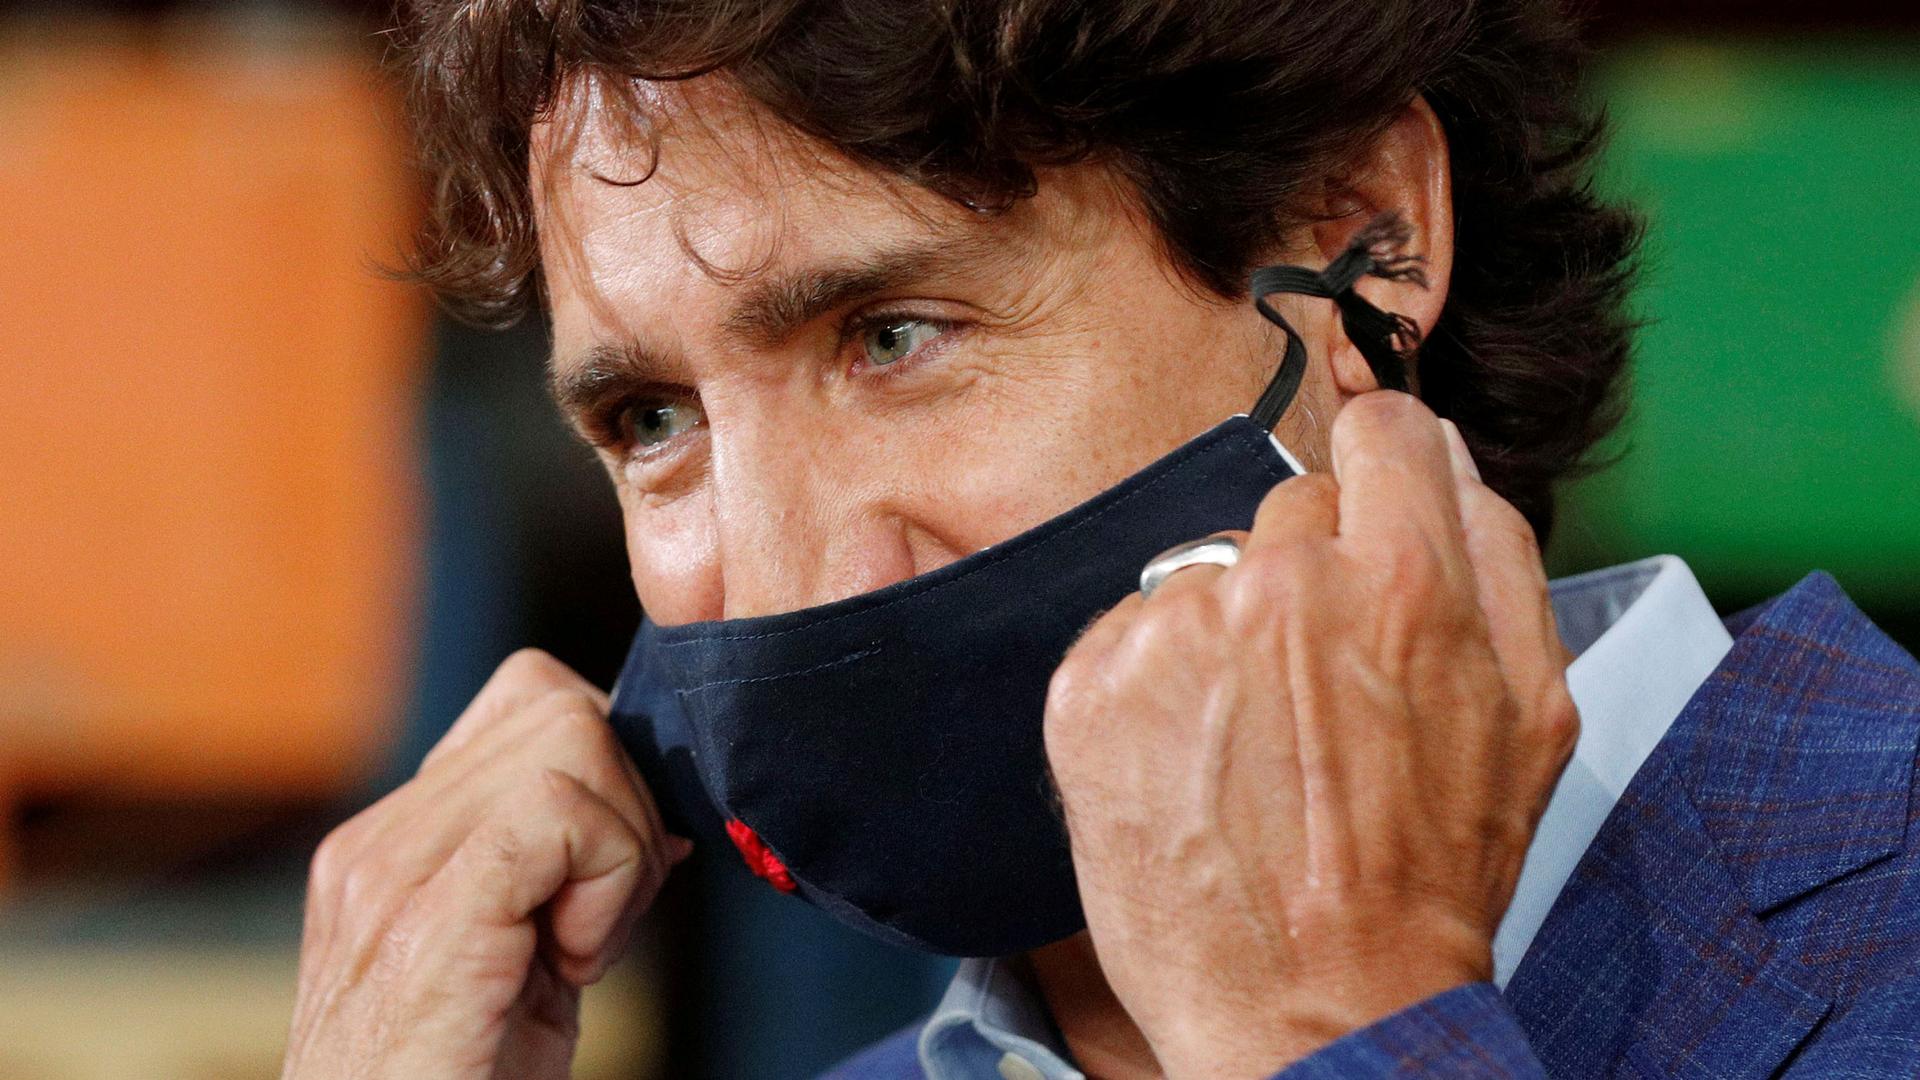 Canada's Prime Minister Justin Trudeau is shown in a close-up photo removing a dark face mask and wearing plaid suit coat.